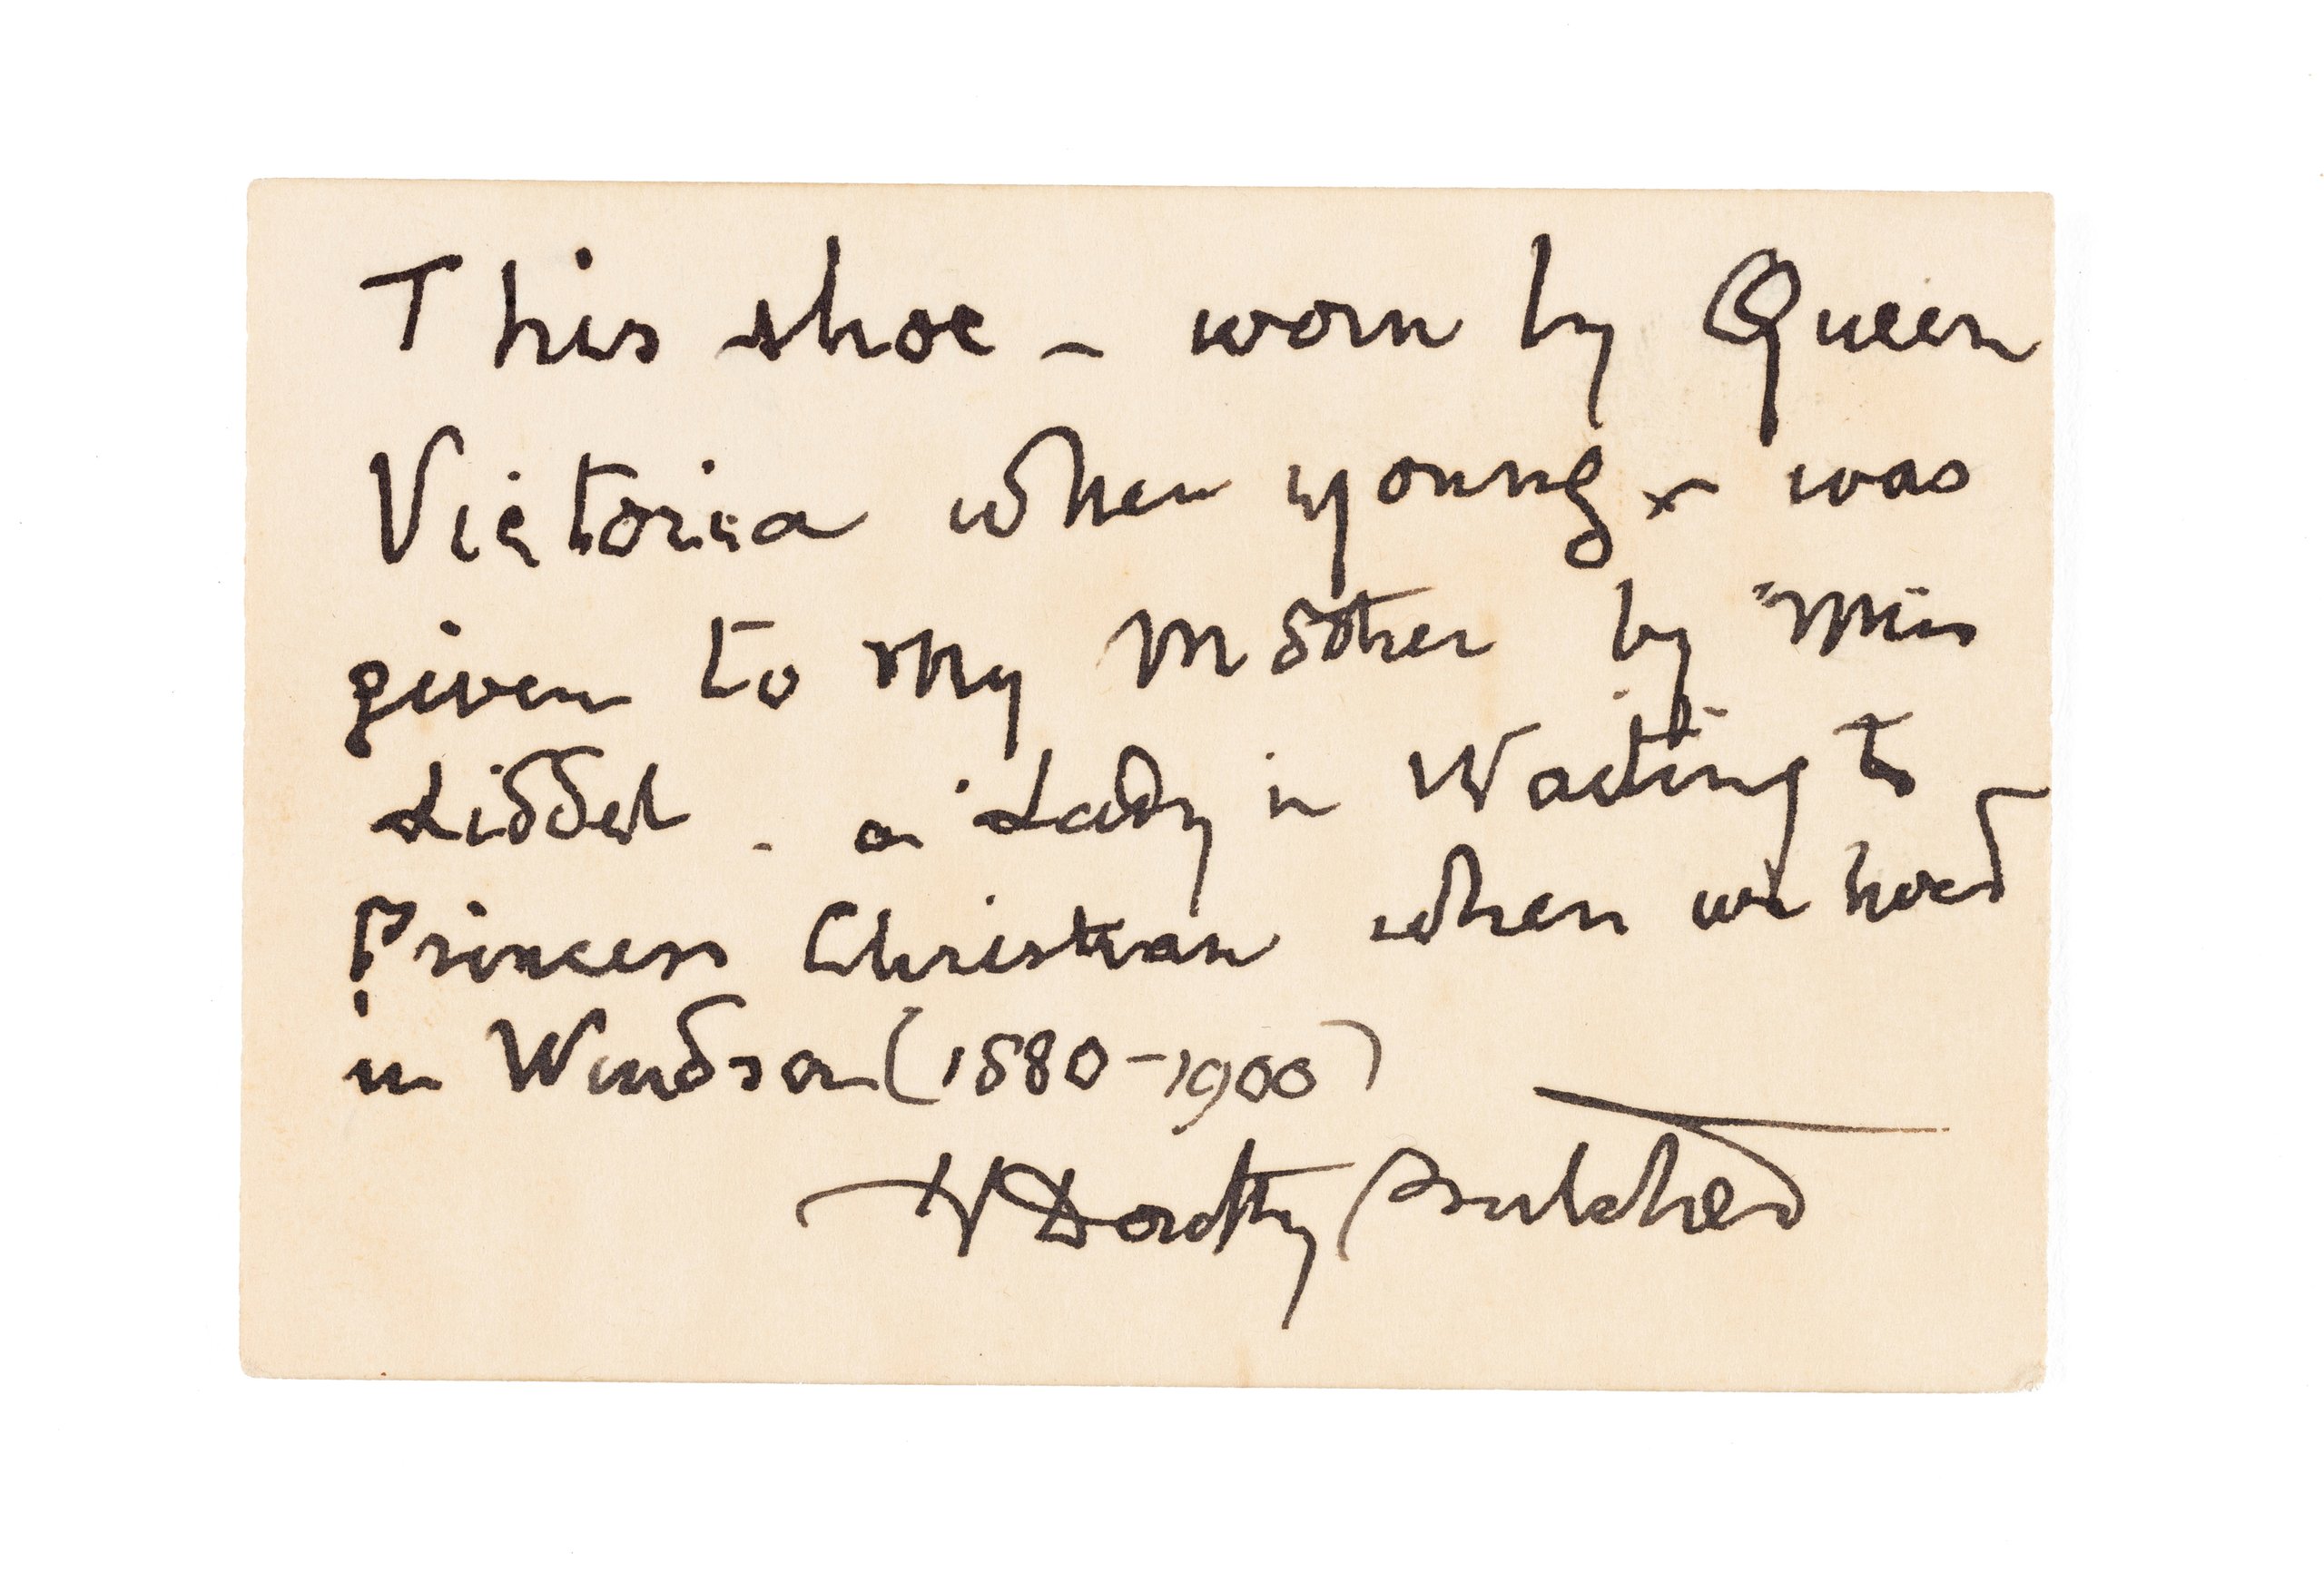 Calling card found inside shoes worn by Queen Victoria